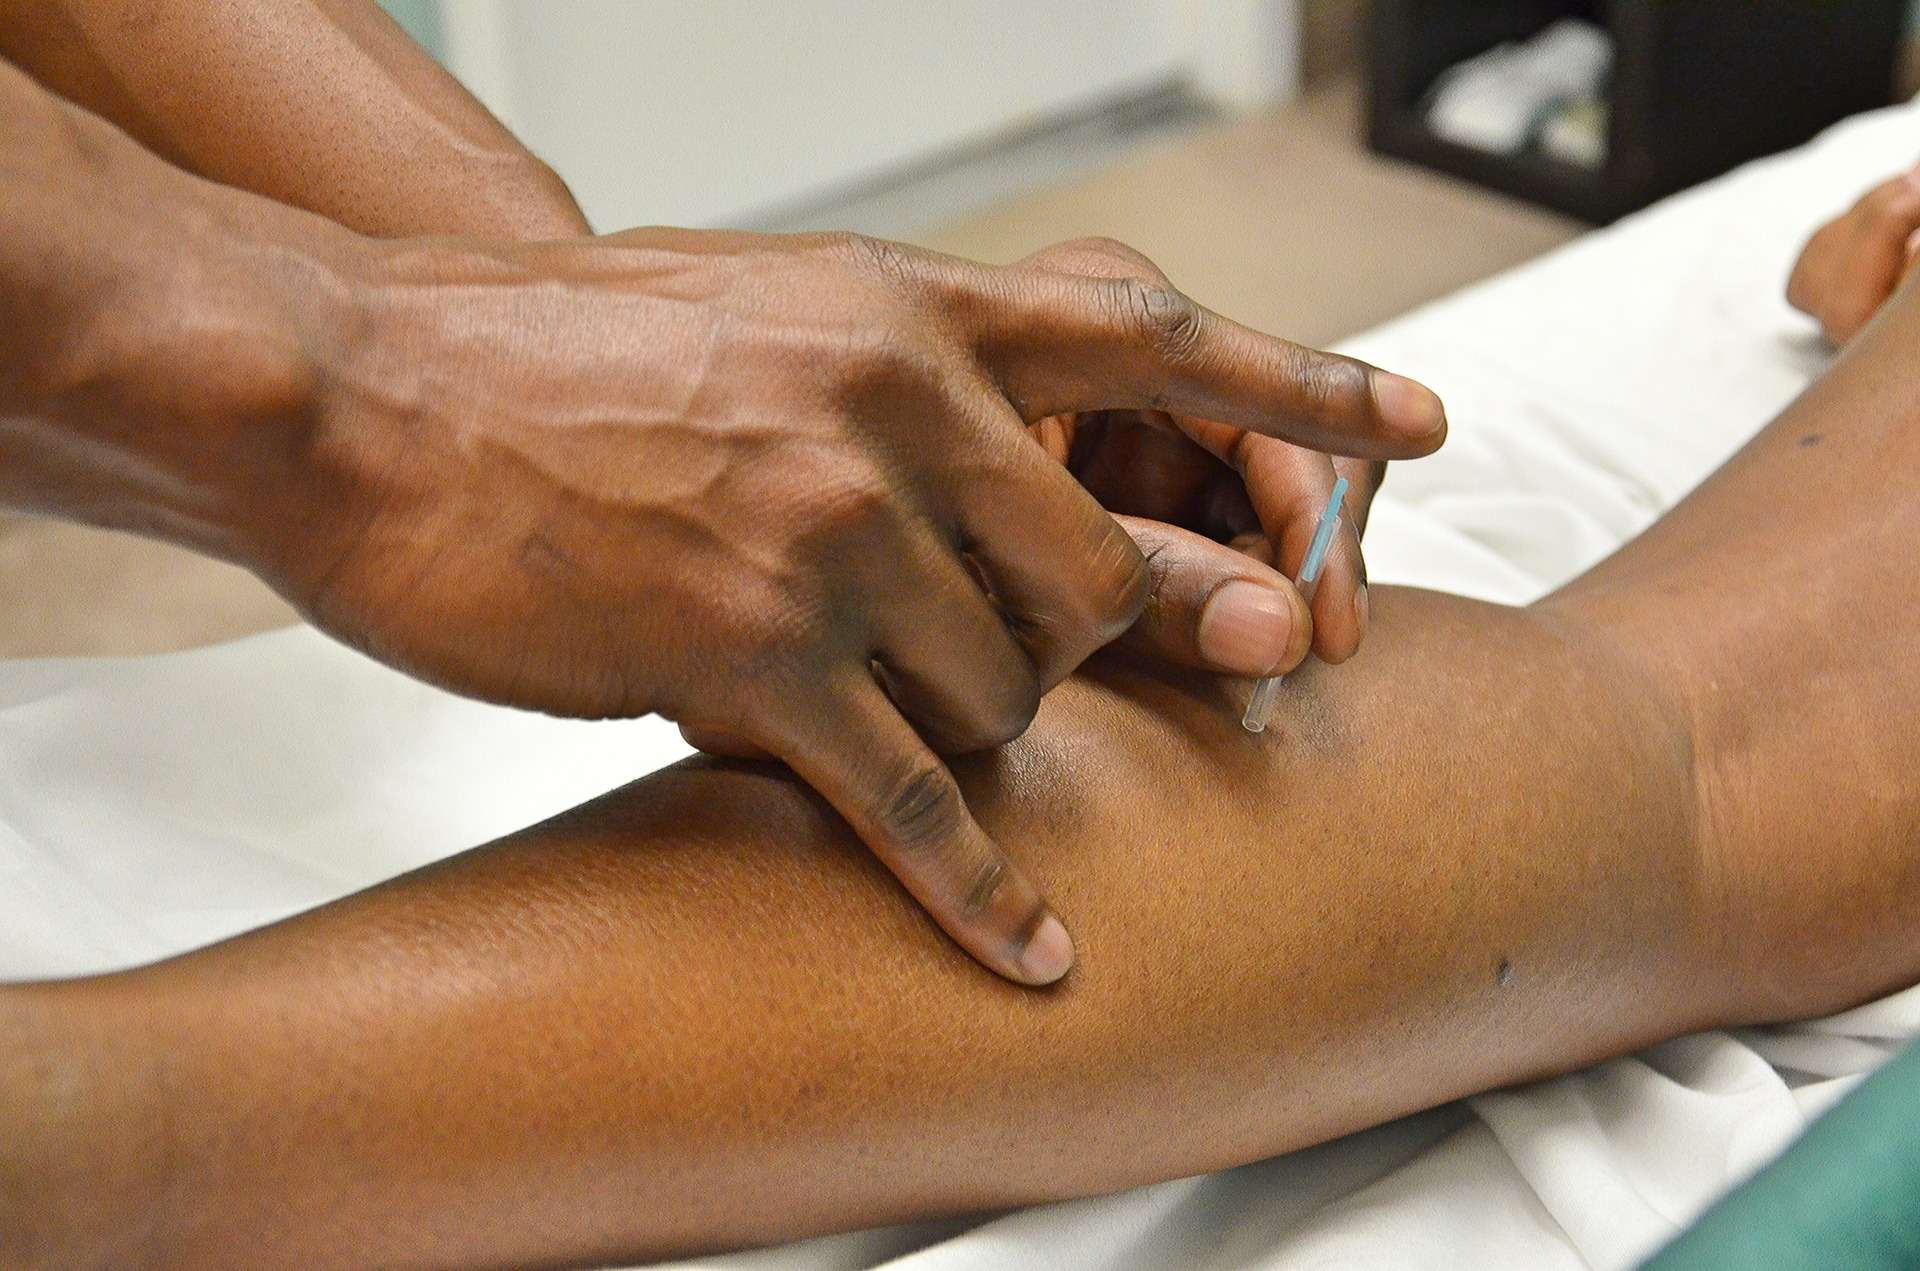 acupuncture trigger point dry needling